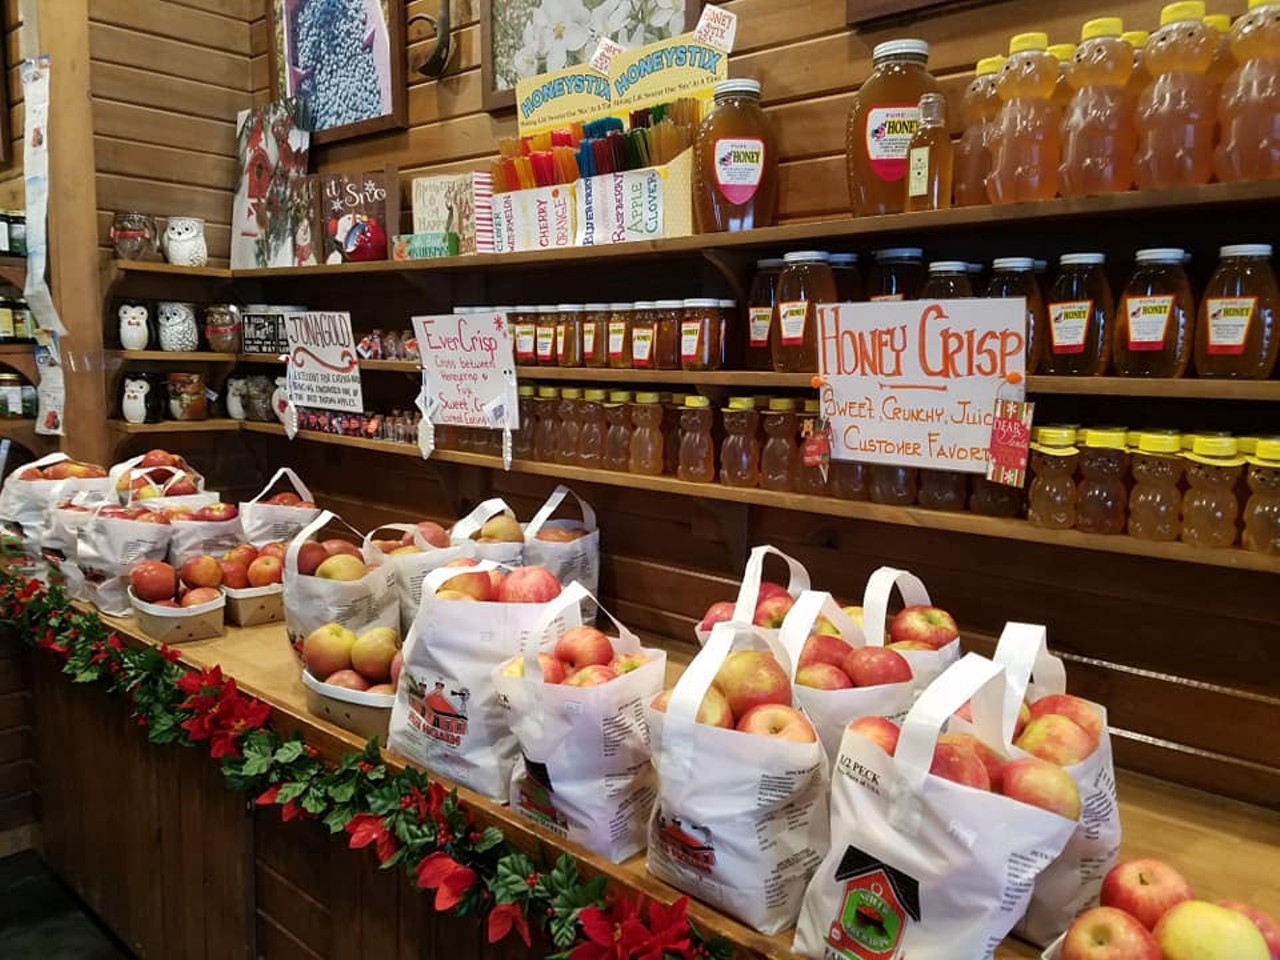 Plymouth Orchards and Cider Mill
10685 Warren Rd., Plymouth; 734-455-2290; plymouthorchards.com
Winner of the Michigan Apple Cider Contest in 2013, Plymouth Orchards and Cider Mill serves up cider, baked goods, and holiday pies. They also provide a heated space for visitors to eat doughnuts, drink cider, or simply lounge in while watching doughnuts being made.
Photo via Plymouth Apple Orchards and Cider Mill / Facebook